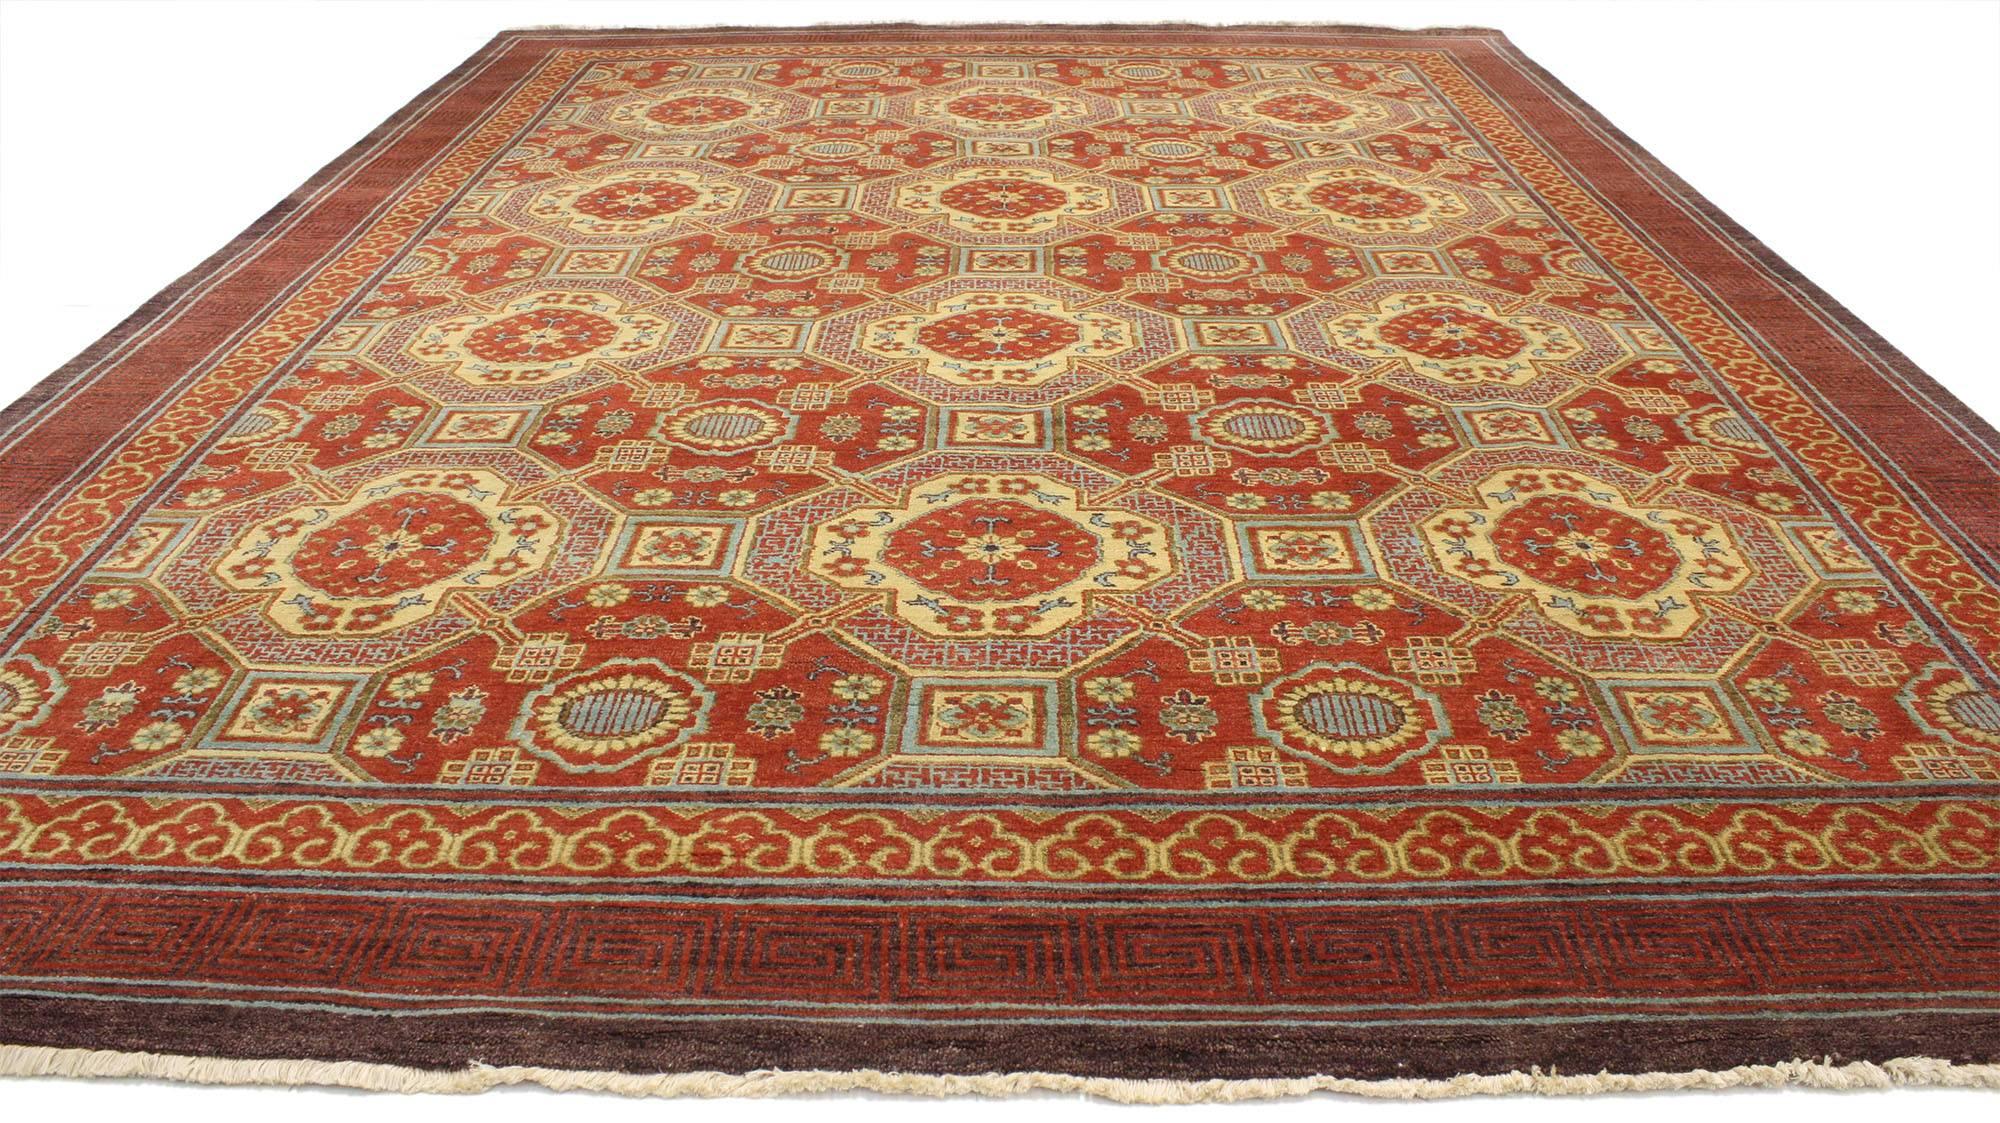 30351, new modern Asian Khotan design rug with Hollywood Regency style. This hand-knotted wool modern Asian Khotan design area rug with Hollywood Regency style features an all-over pattern of alternating interlocking octagons, each set with red